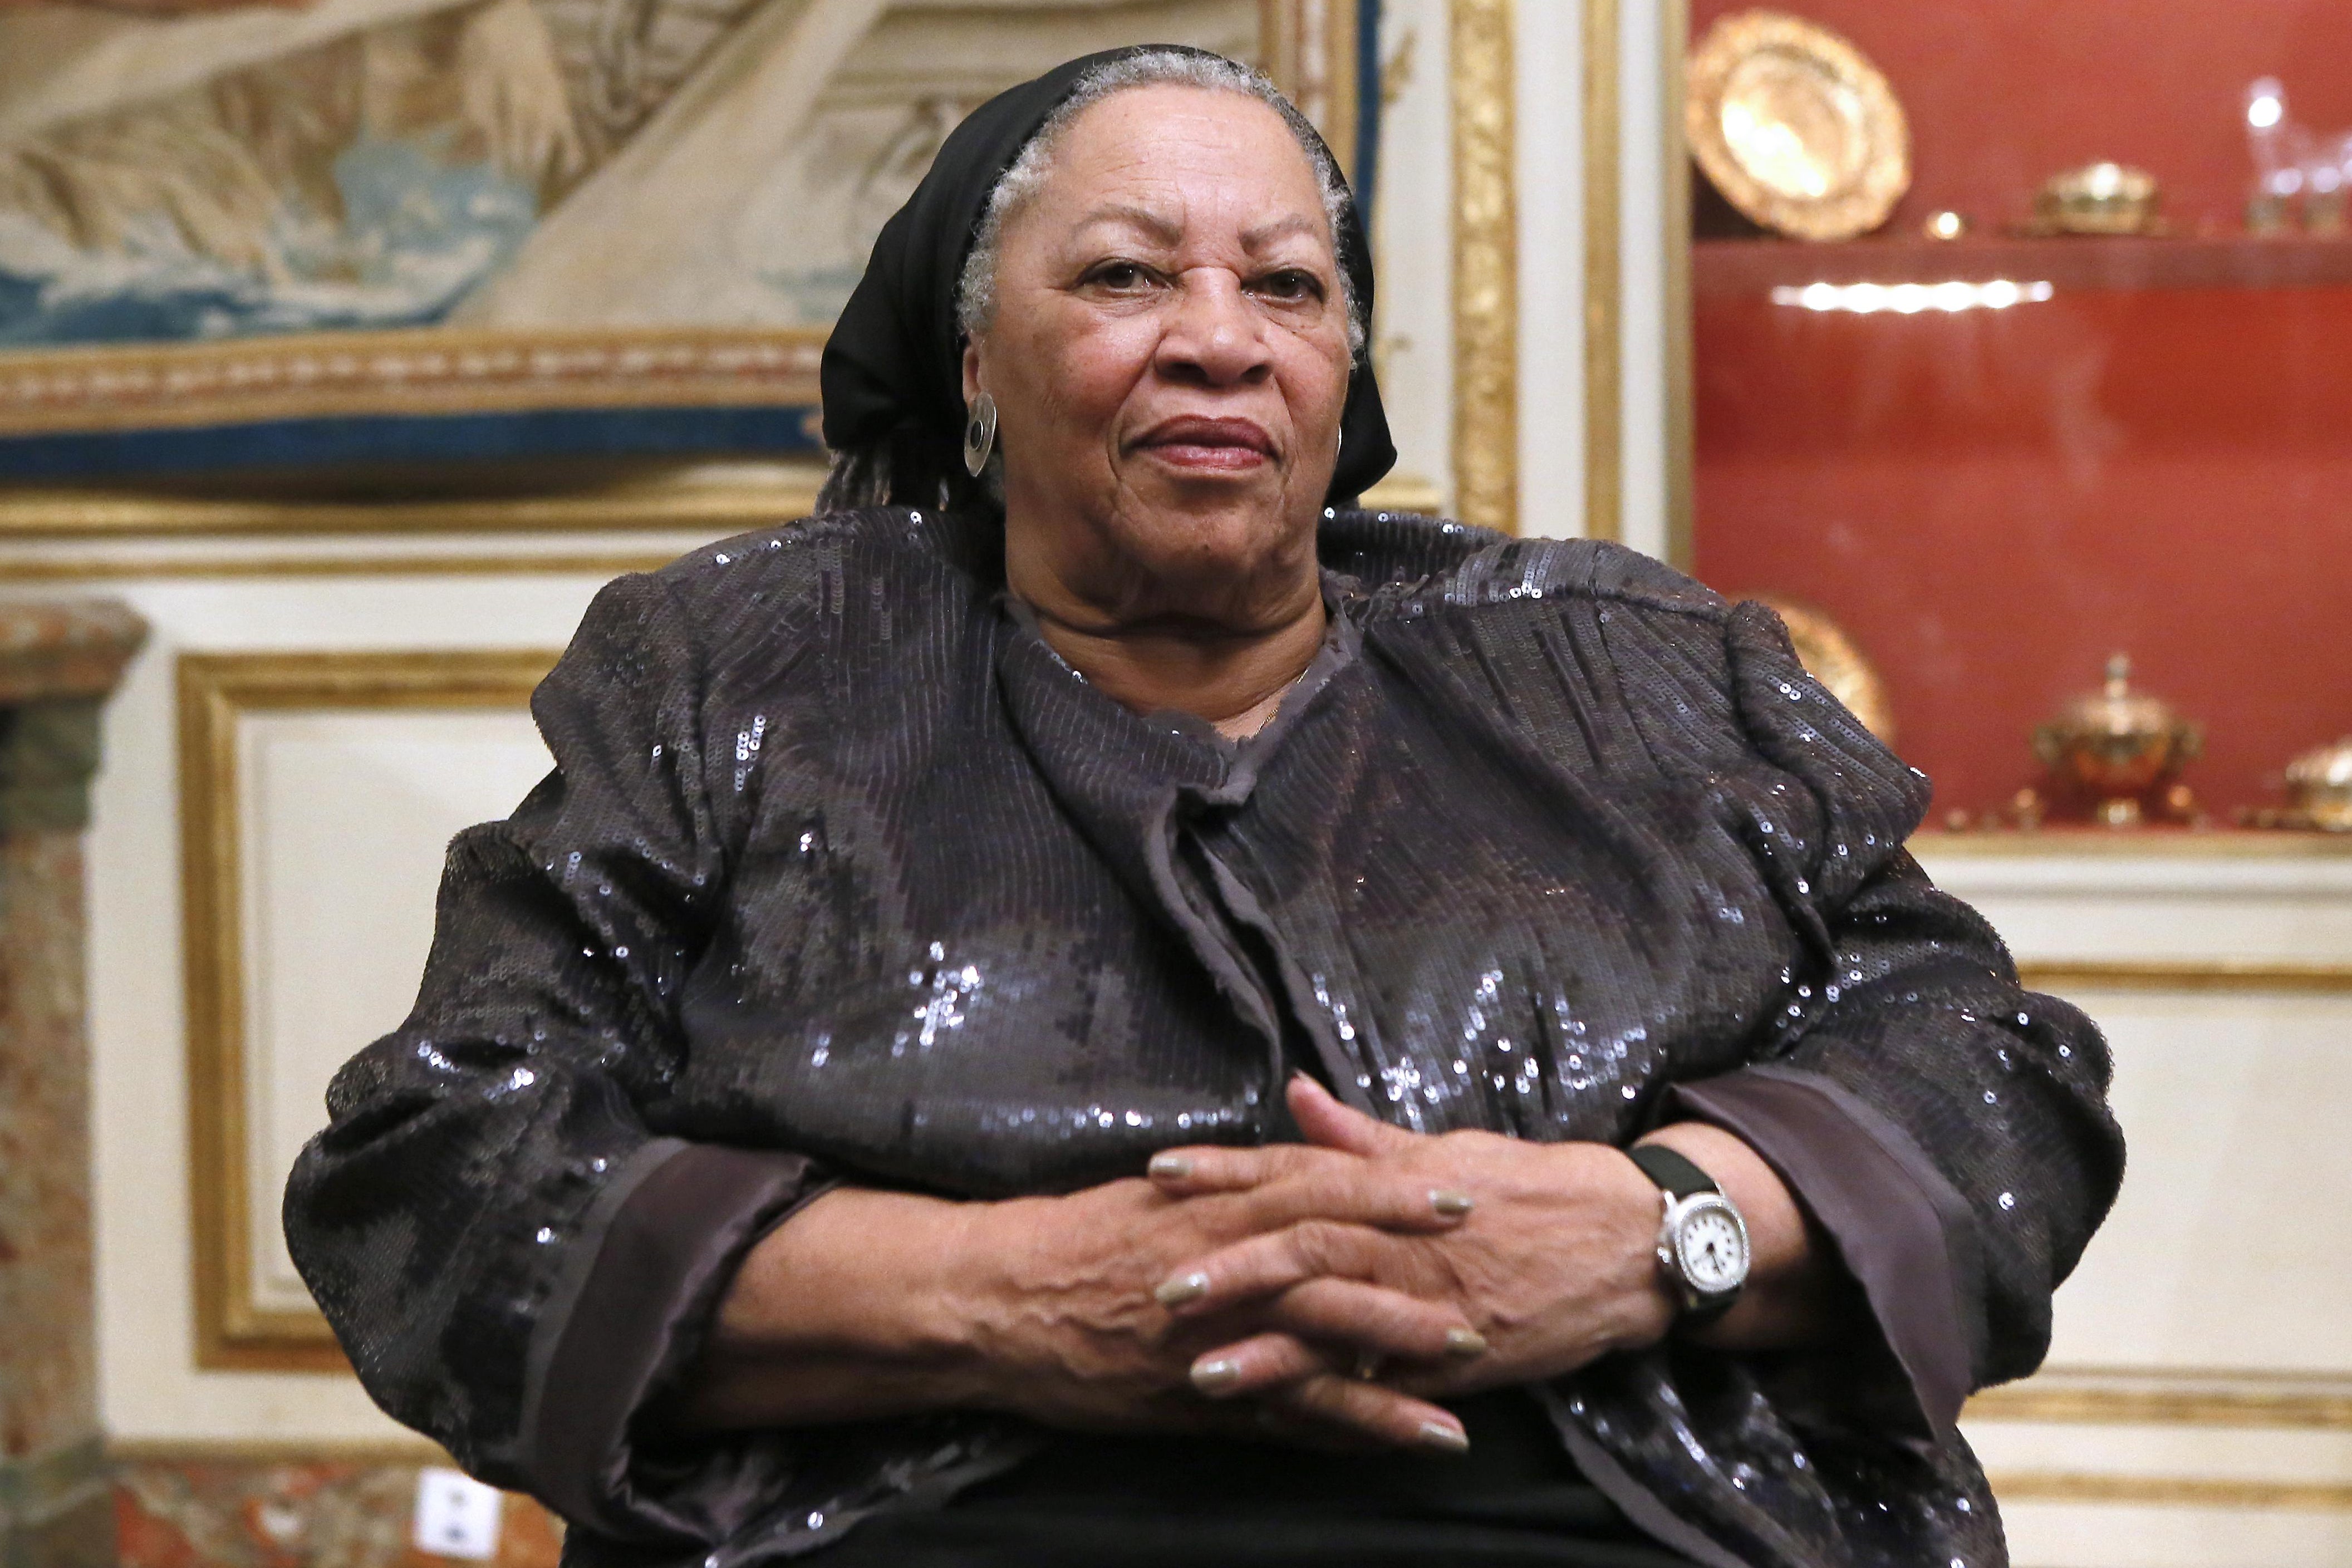 US author Toni Morrison poses on September 21, 2012 during a reception sponsored by the US ambassador at his residence in Paris, as part of the 10th America Festival. The America Festival is a cultural event held in France every two years which gathers well-known figures from the world of literature, music and cinema. AFP PHOTO / PATRICK KOVARIK        (Photo credit should read PATRICK KOVARIK/AFP/GettyImages)